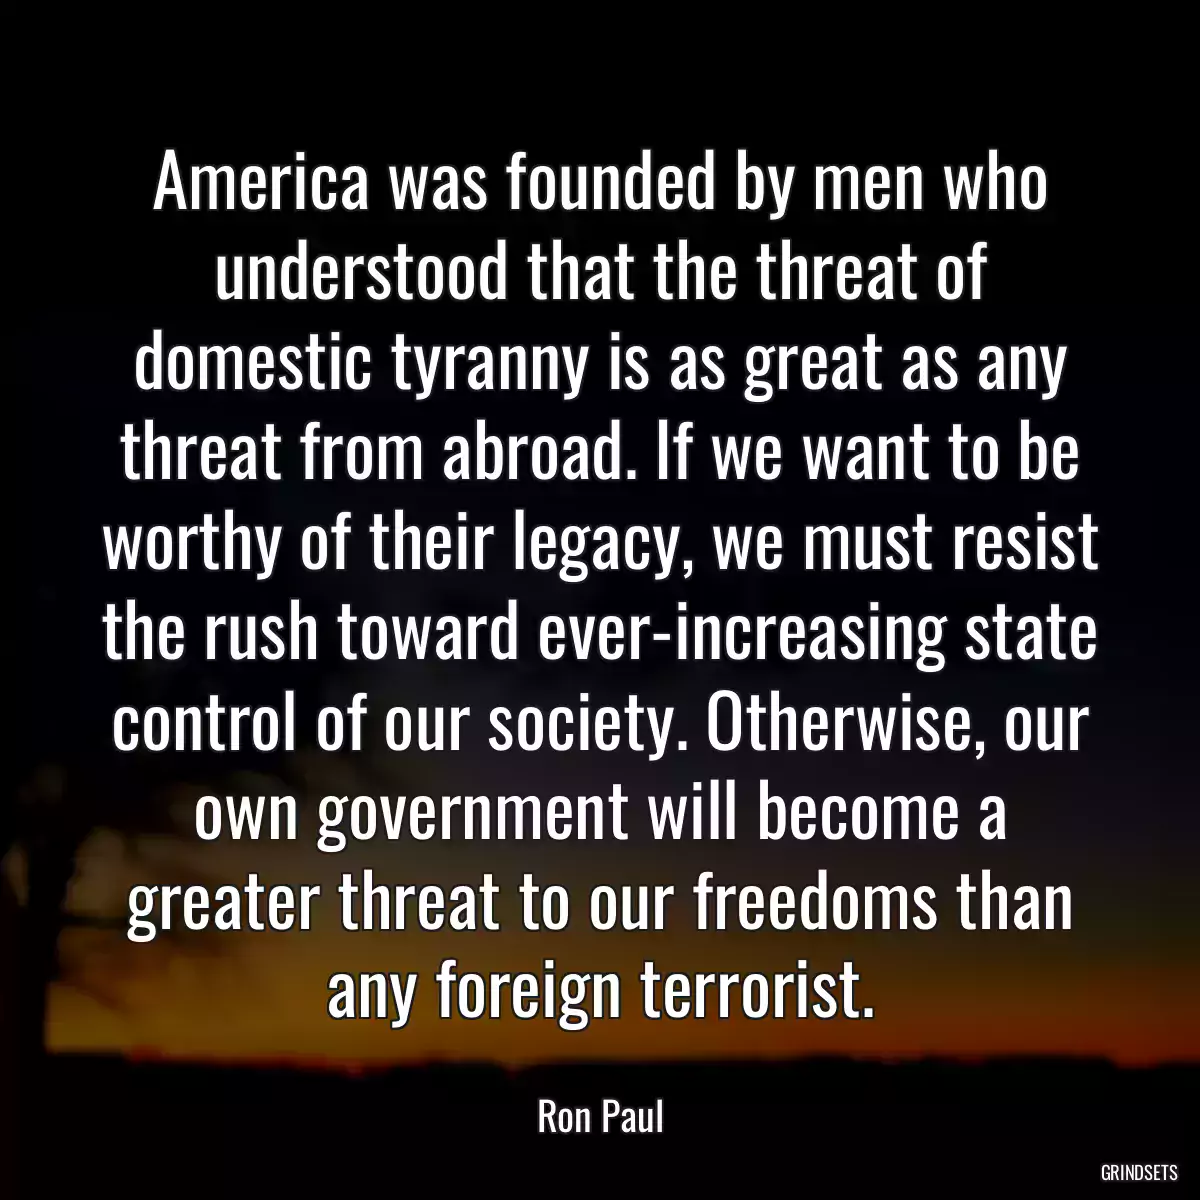 America was founded by men who understood that the threat of domestic tyranny is as great as any threat from abroad. If we want to be worthy of their legacy, we must resist the rush toward ever-increasing state control of our society. Otherwise, our own government will become a greater threat to our freedoms than any foreign terrorist.